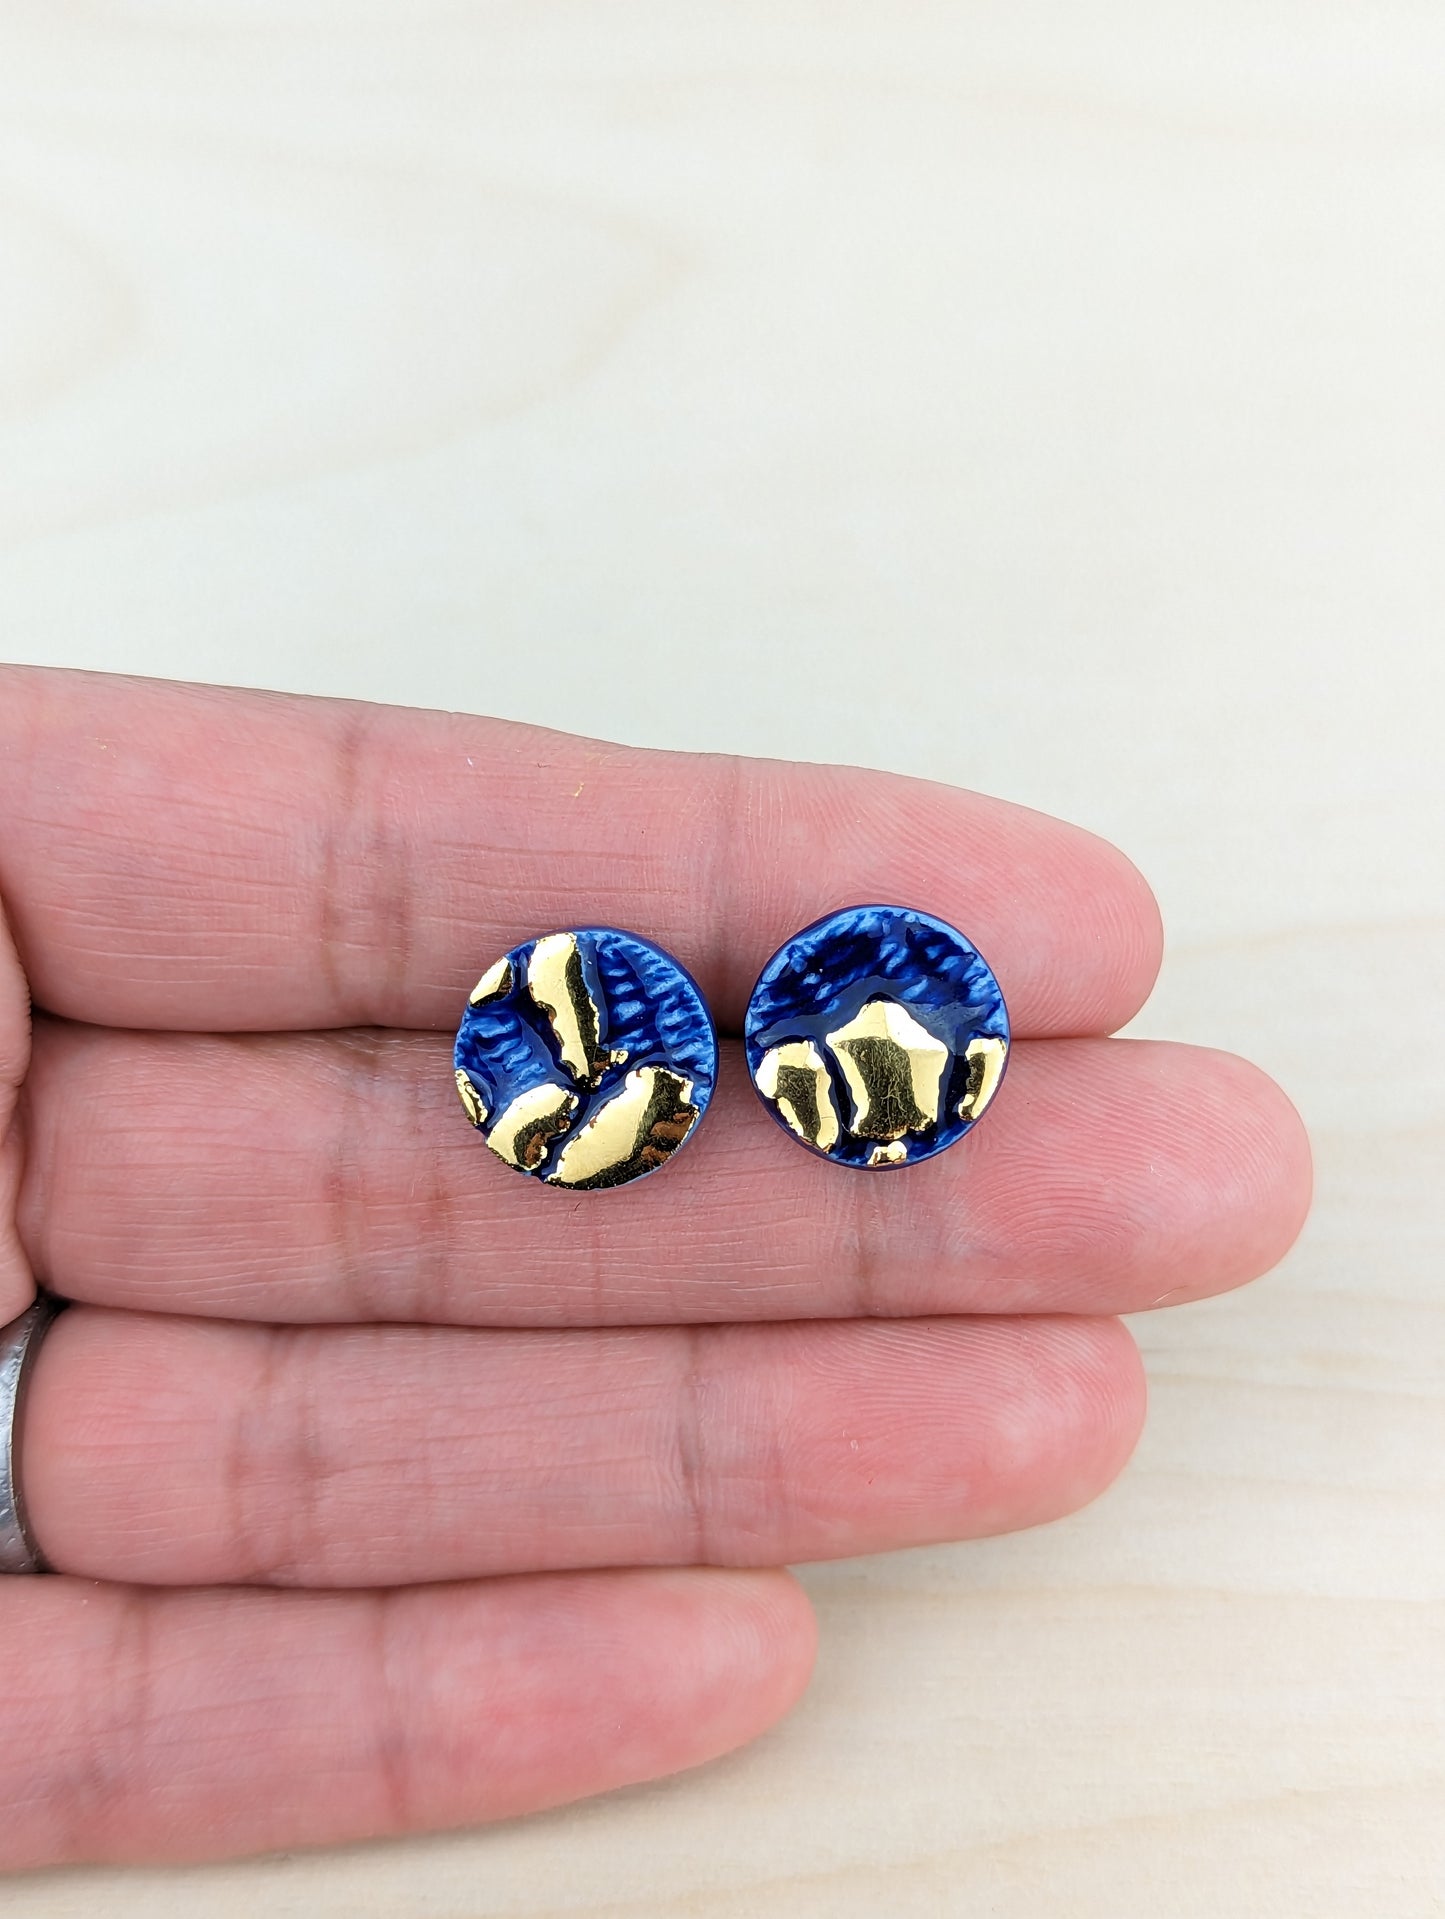 Round Blue Lace Studs with Gold Accents